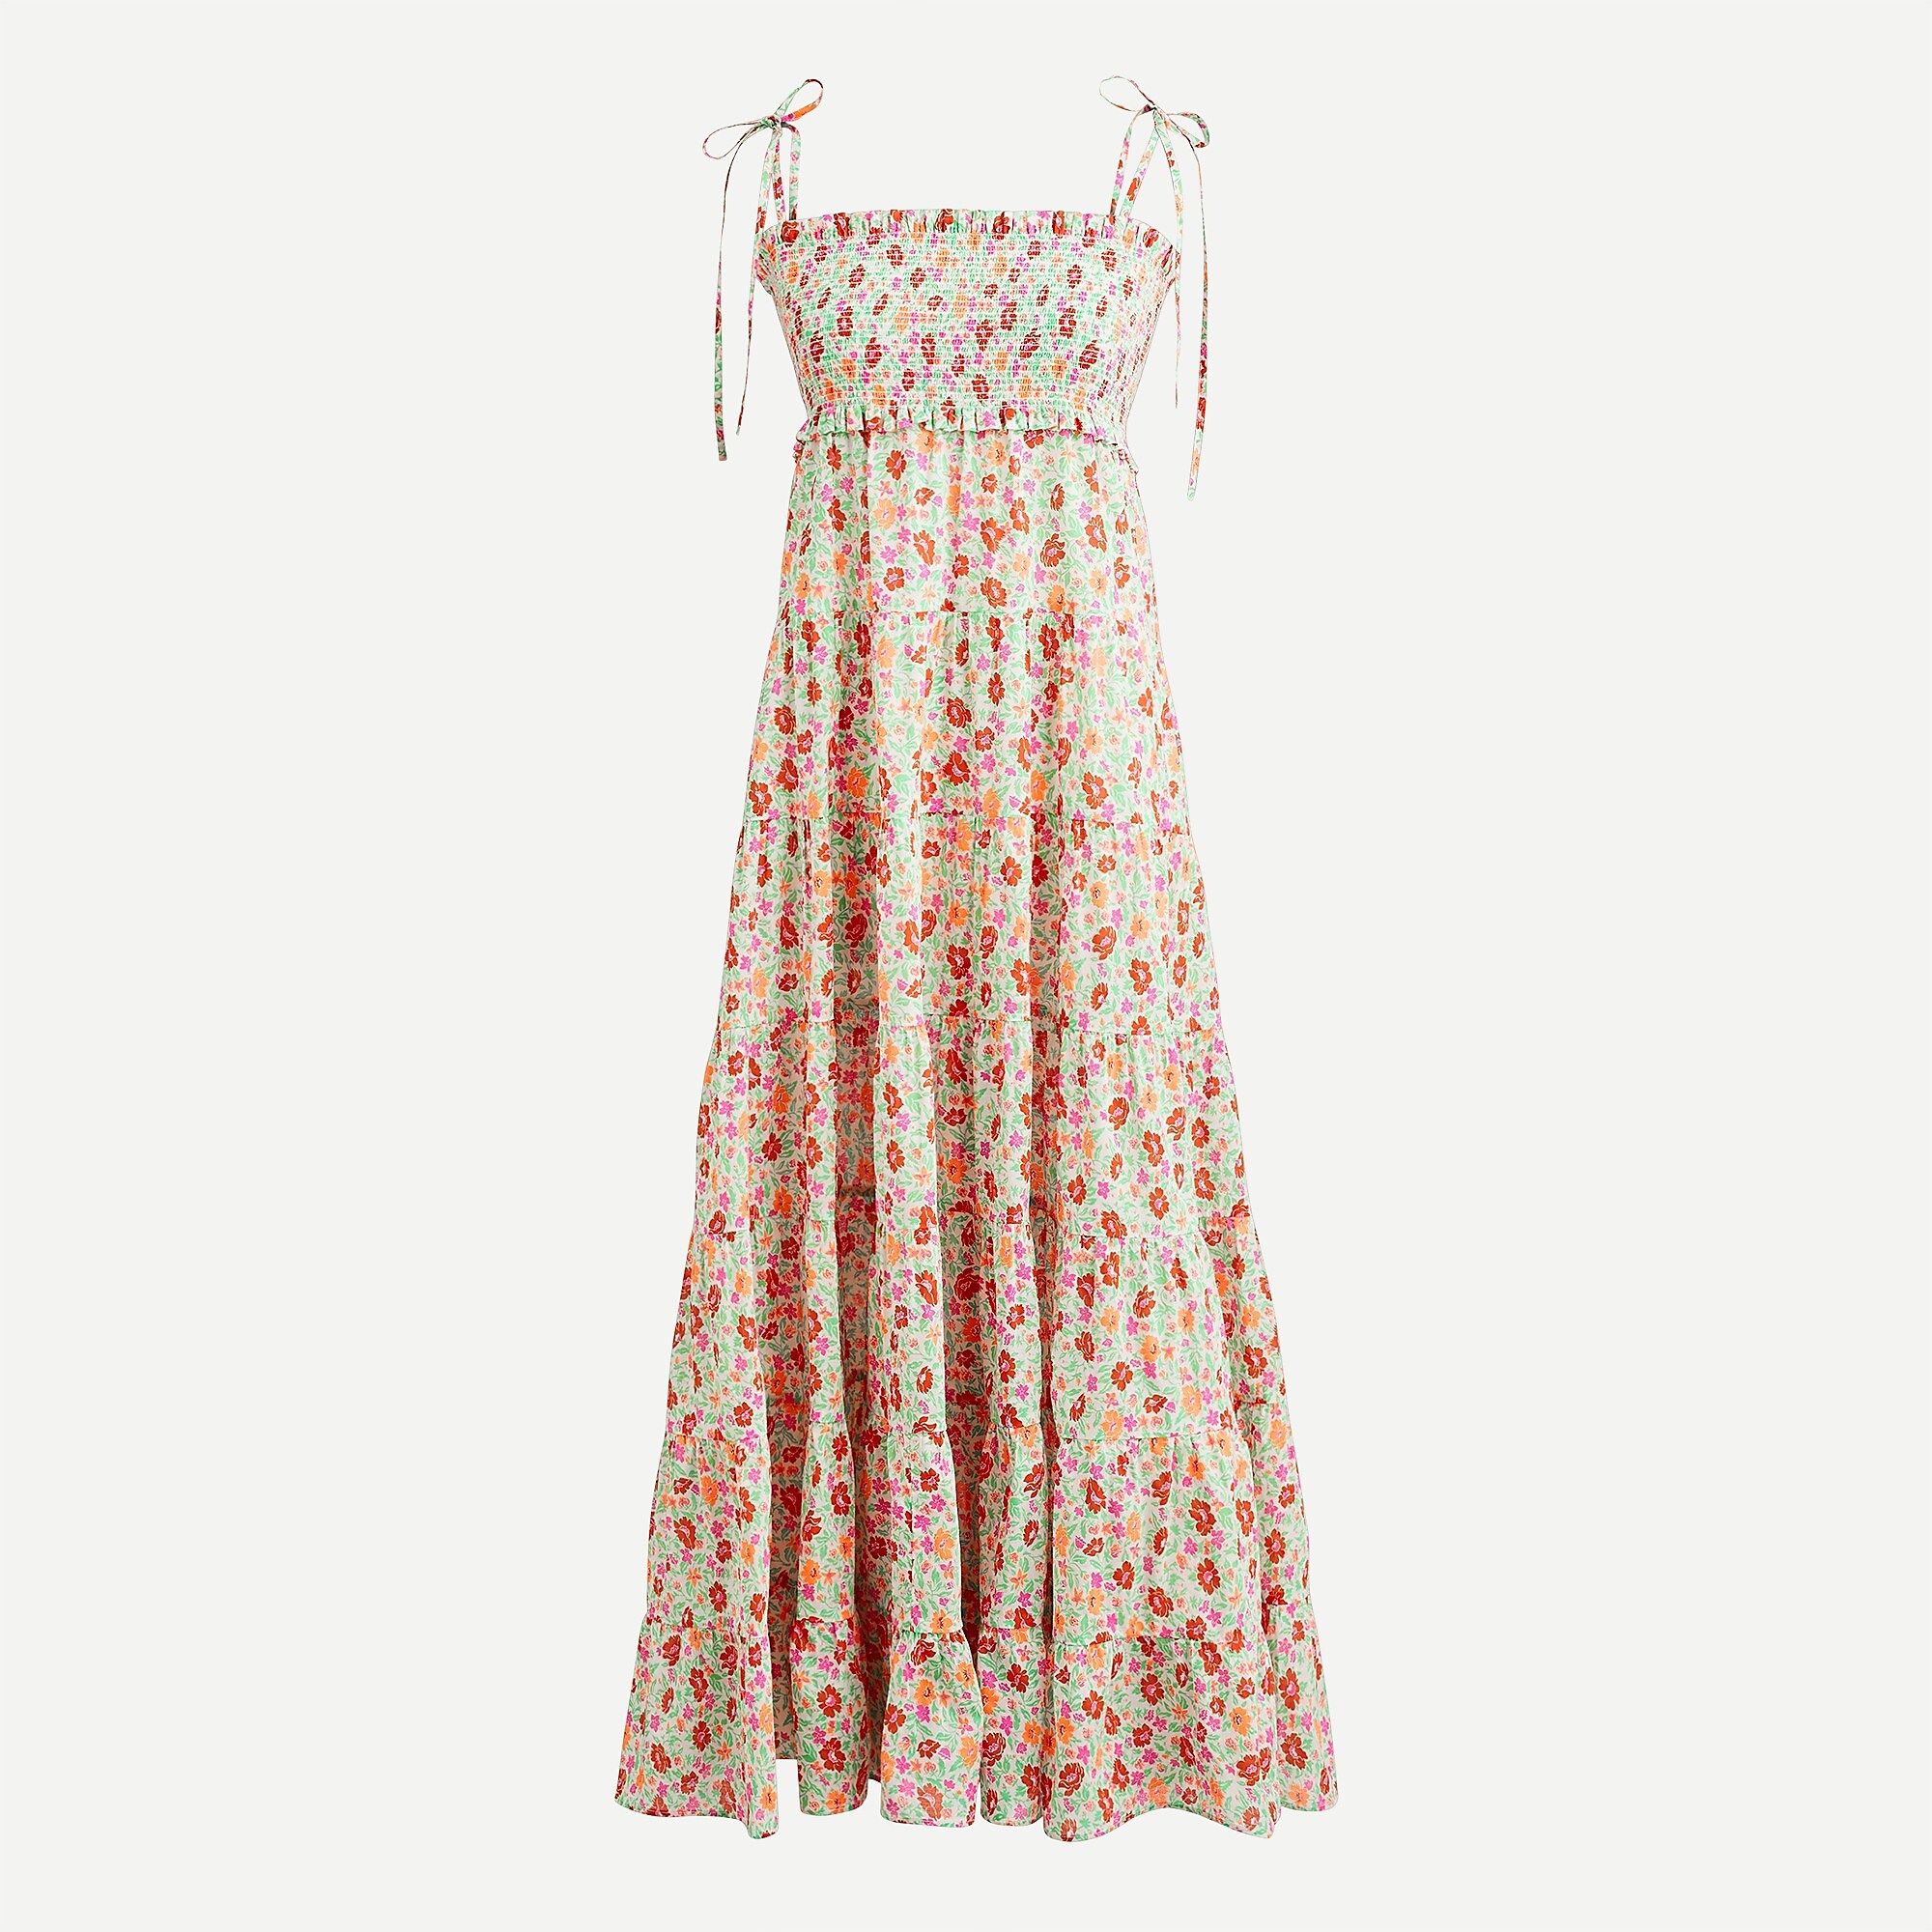 Cotton voile smocked dress in storybook floral | J.Crew US